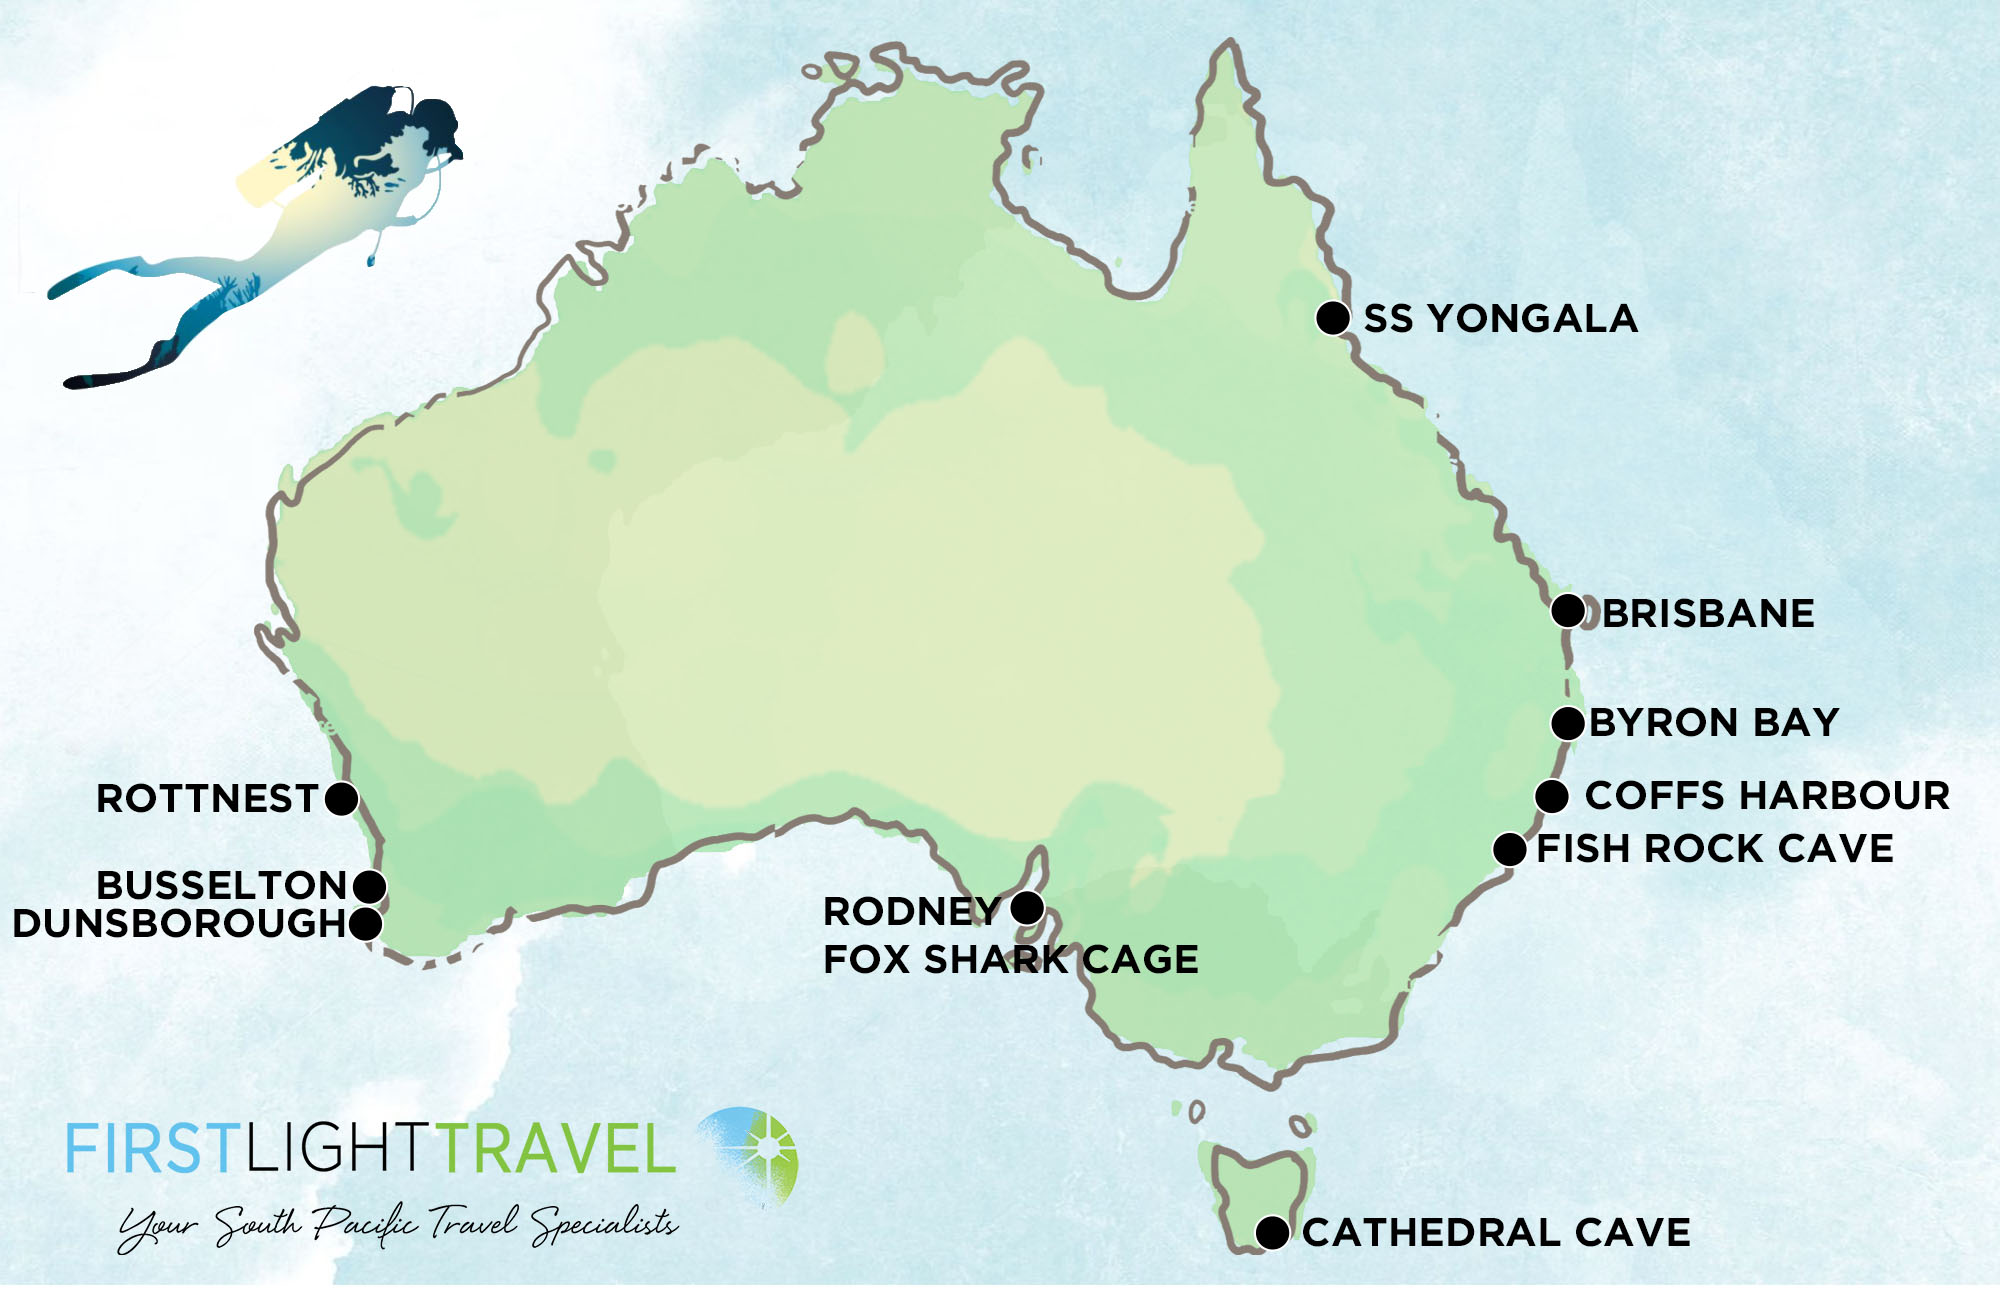 map of scuba diving sites in Australian not including Great Barrier Reef